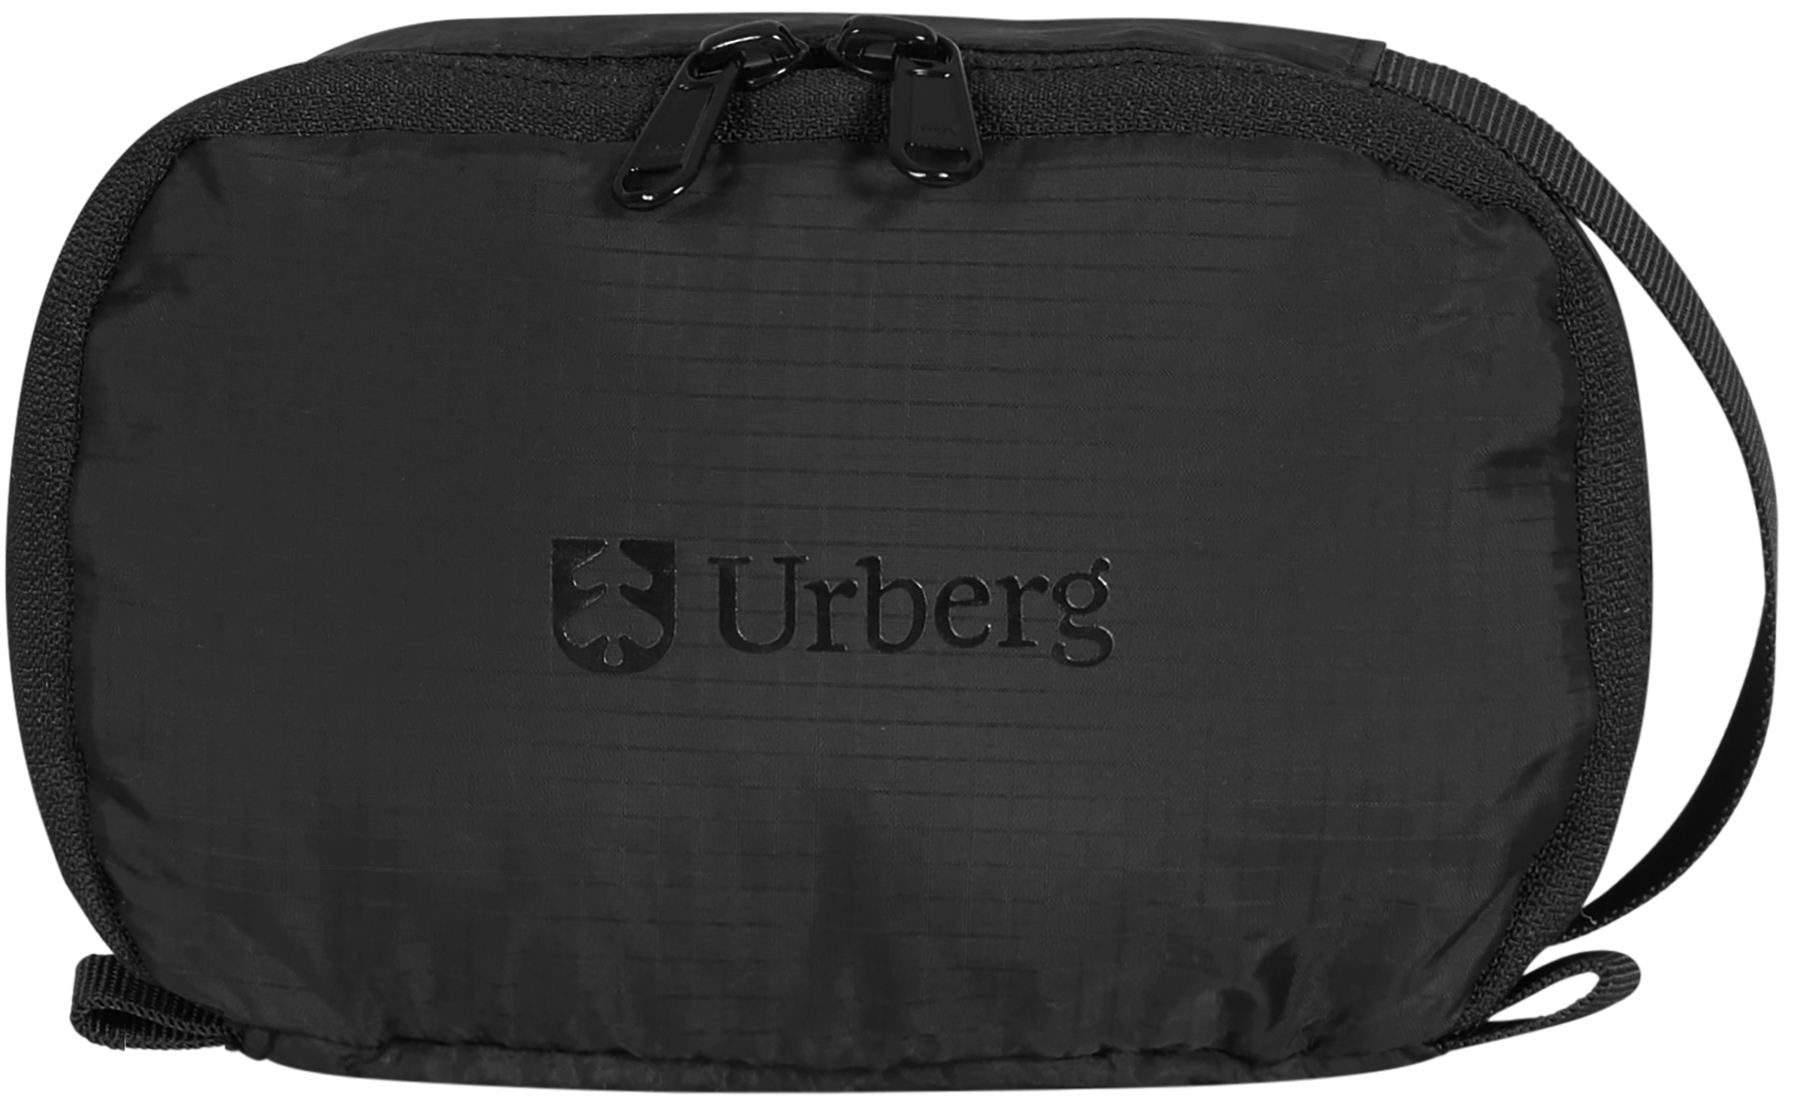 Urberg Packing Cube Small Black